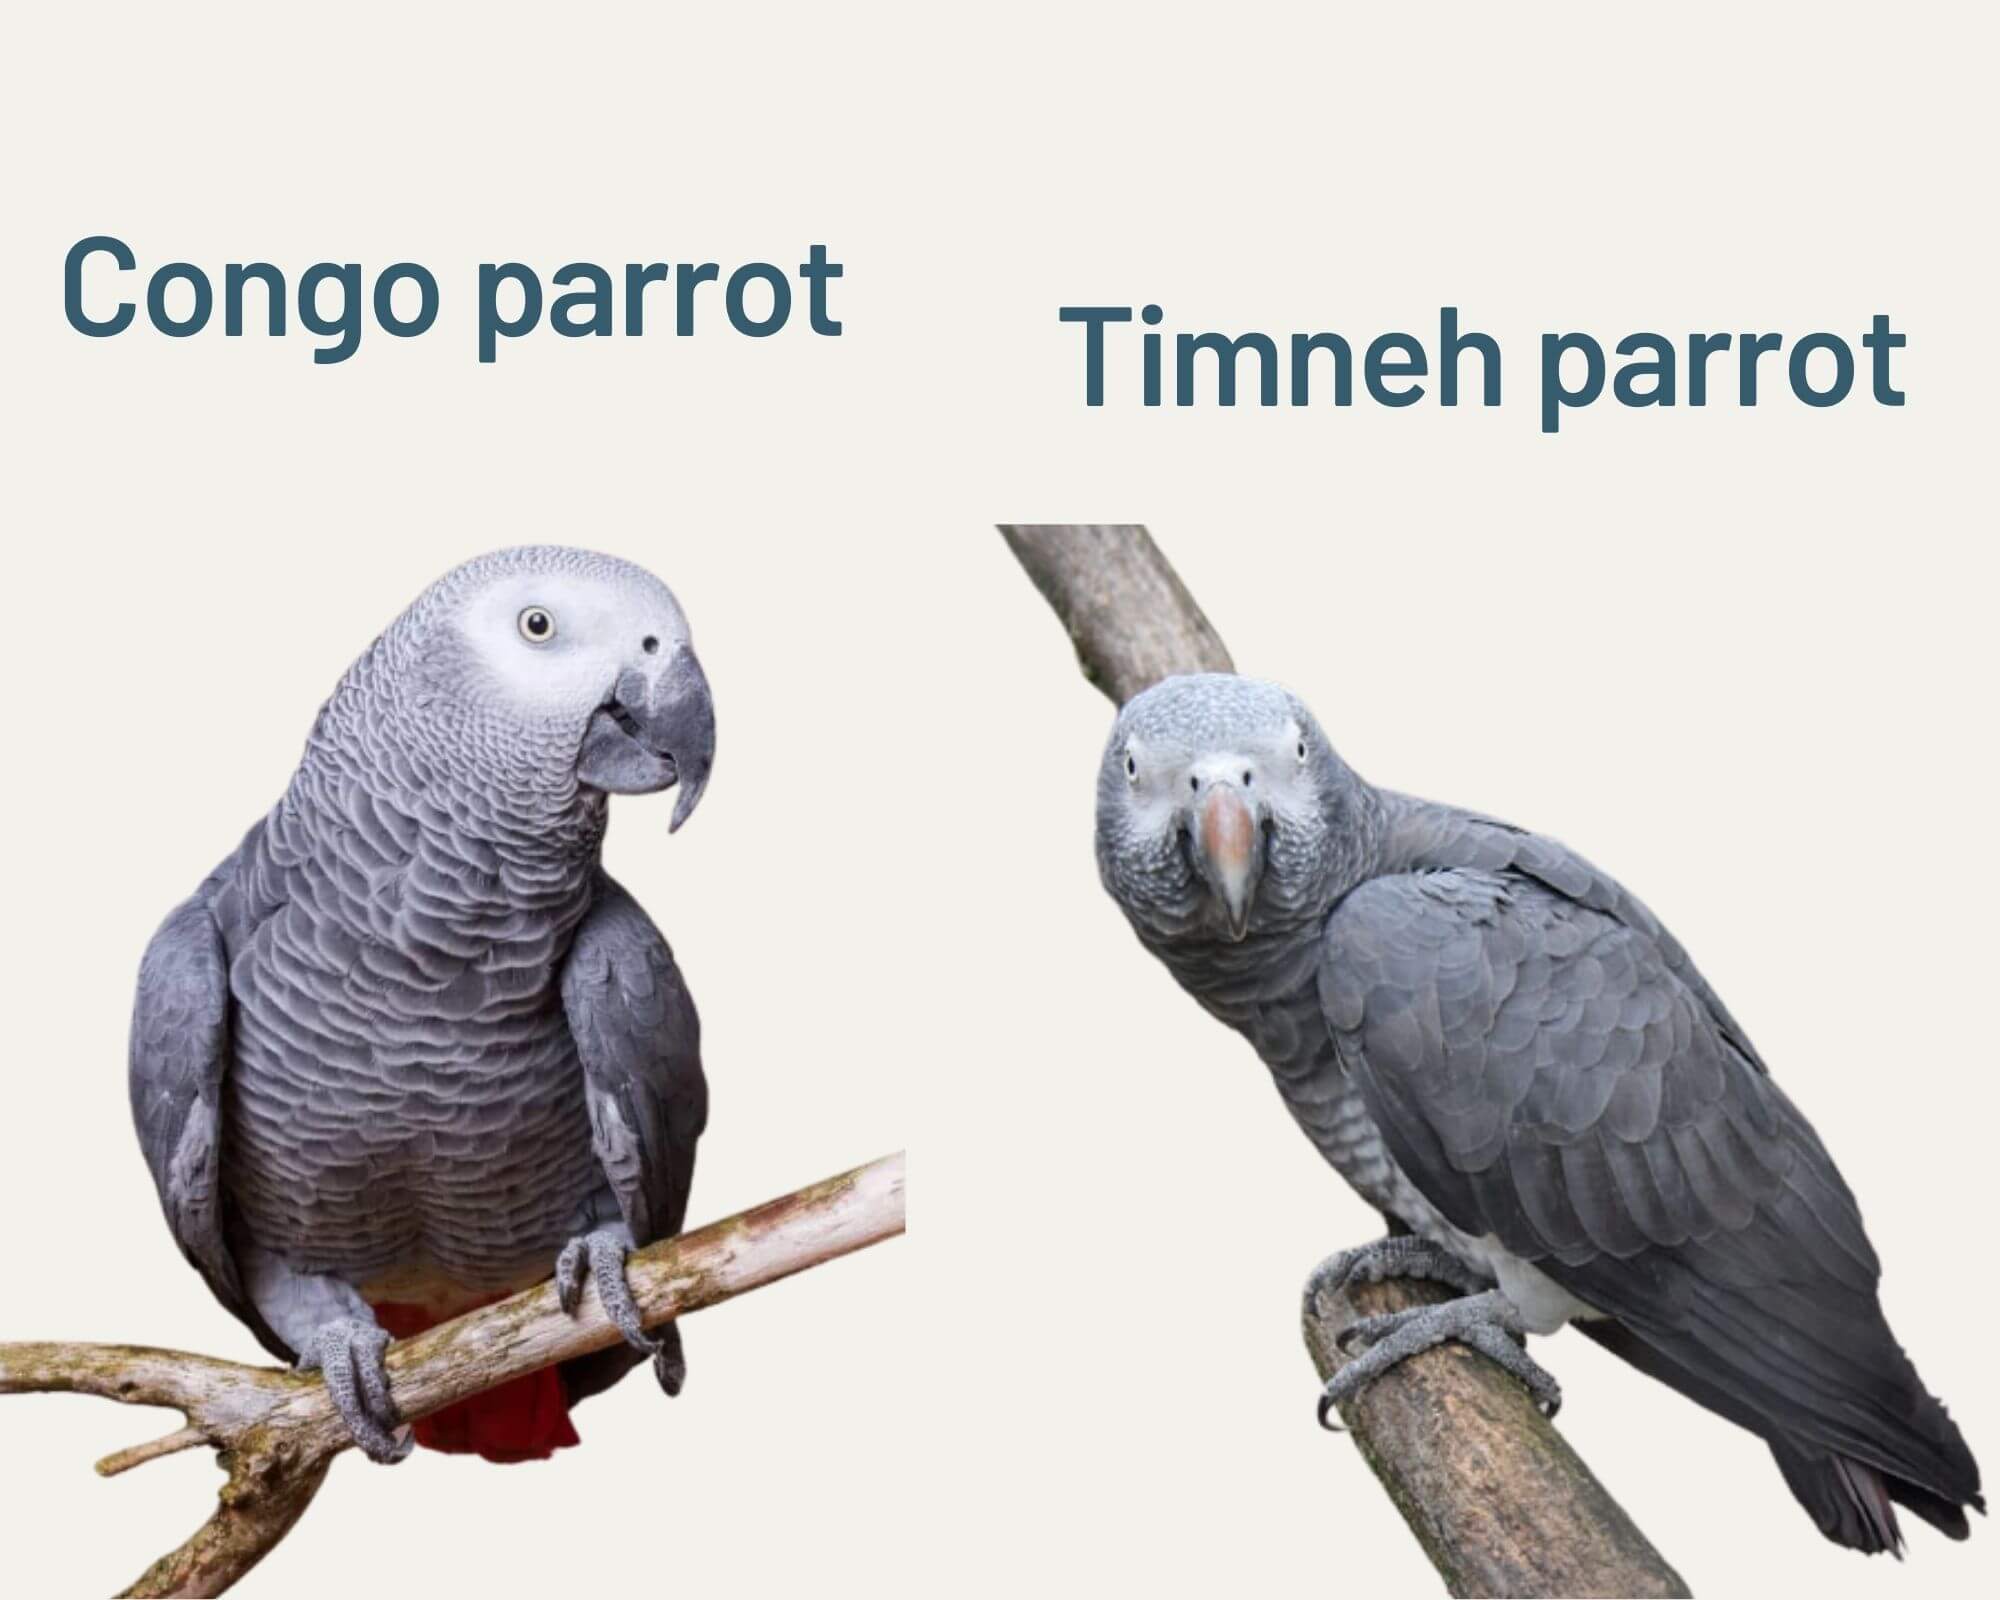 timneh & congo parrot